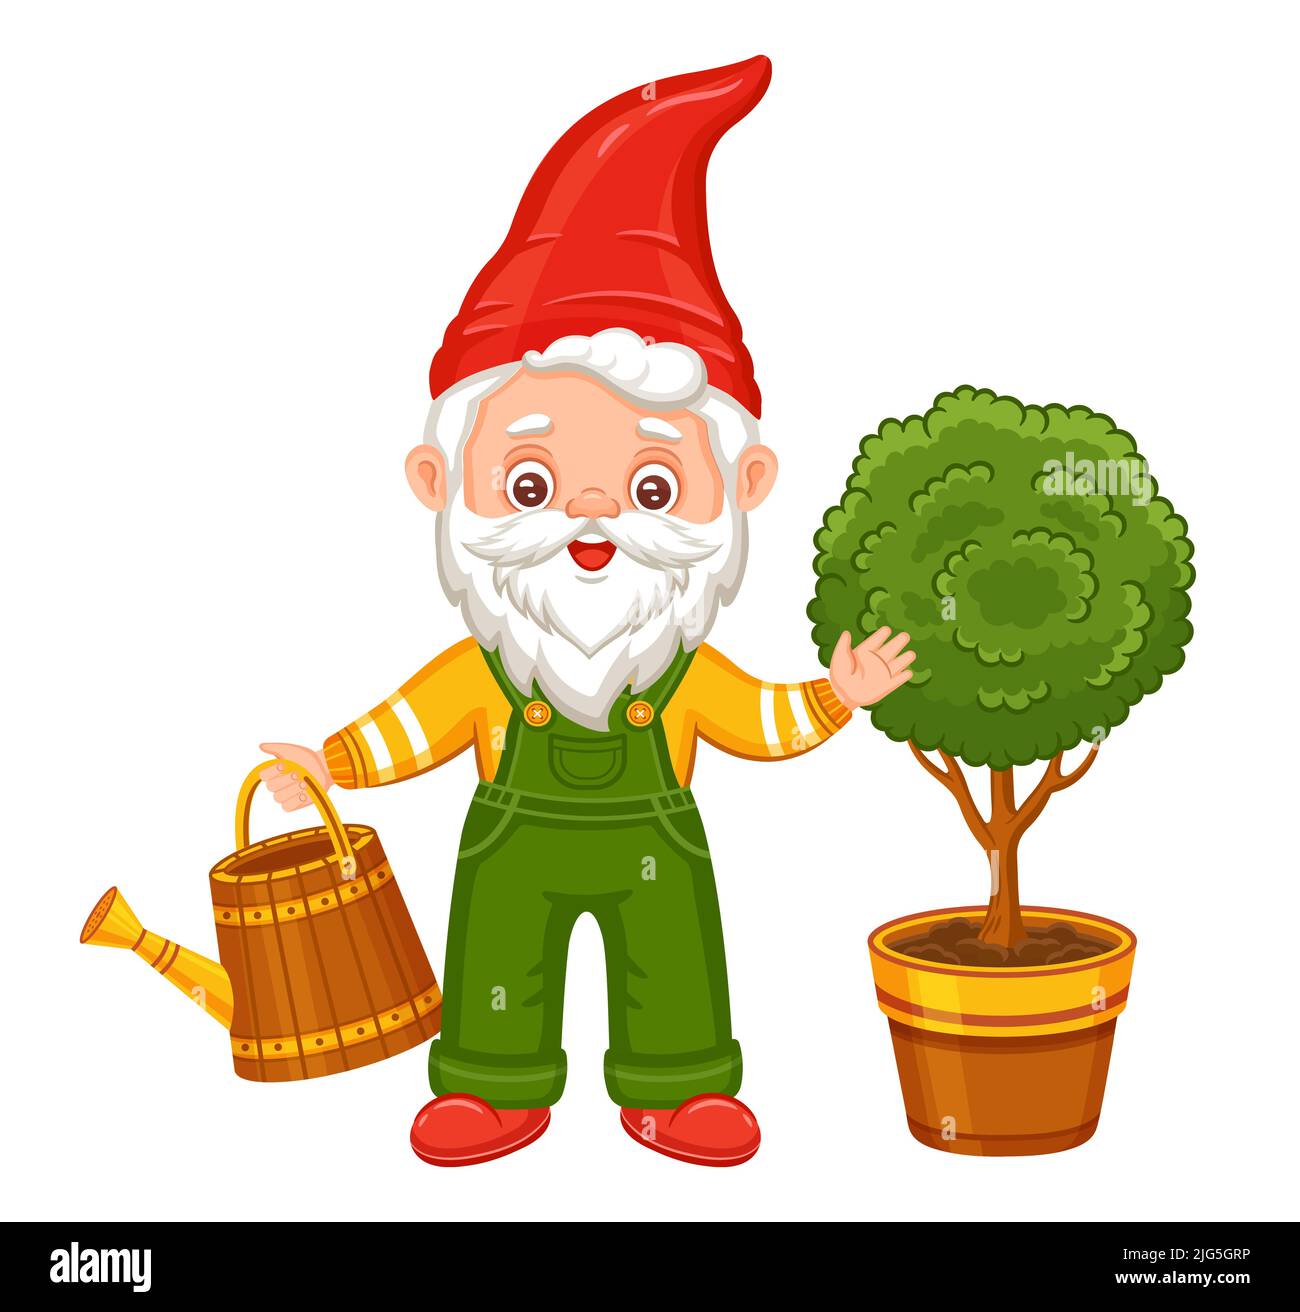 Cute garden gnome, gardener dwarf hold watering can. Little fairytale elf watering plant tree. Magic small old man with beard cartoon character vector Stock Vector